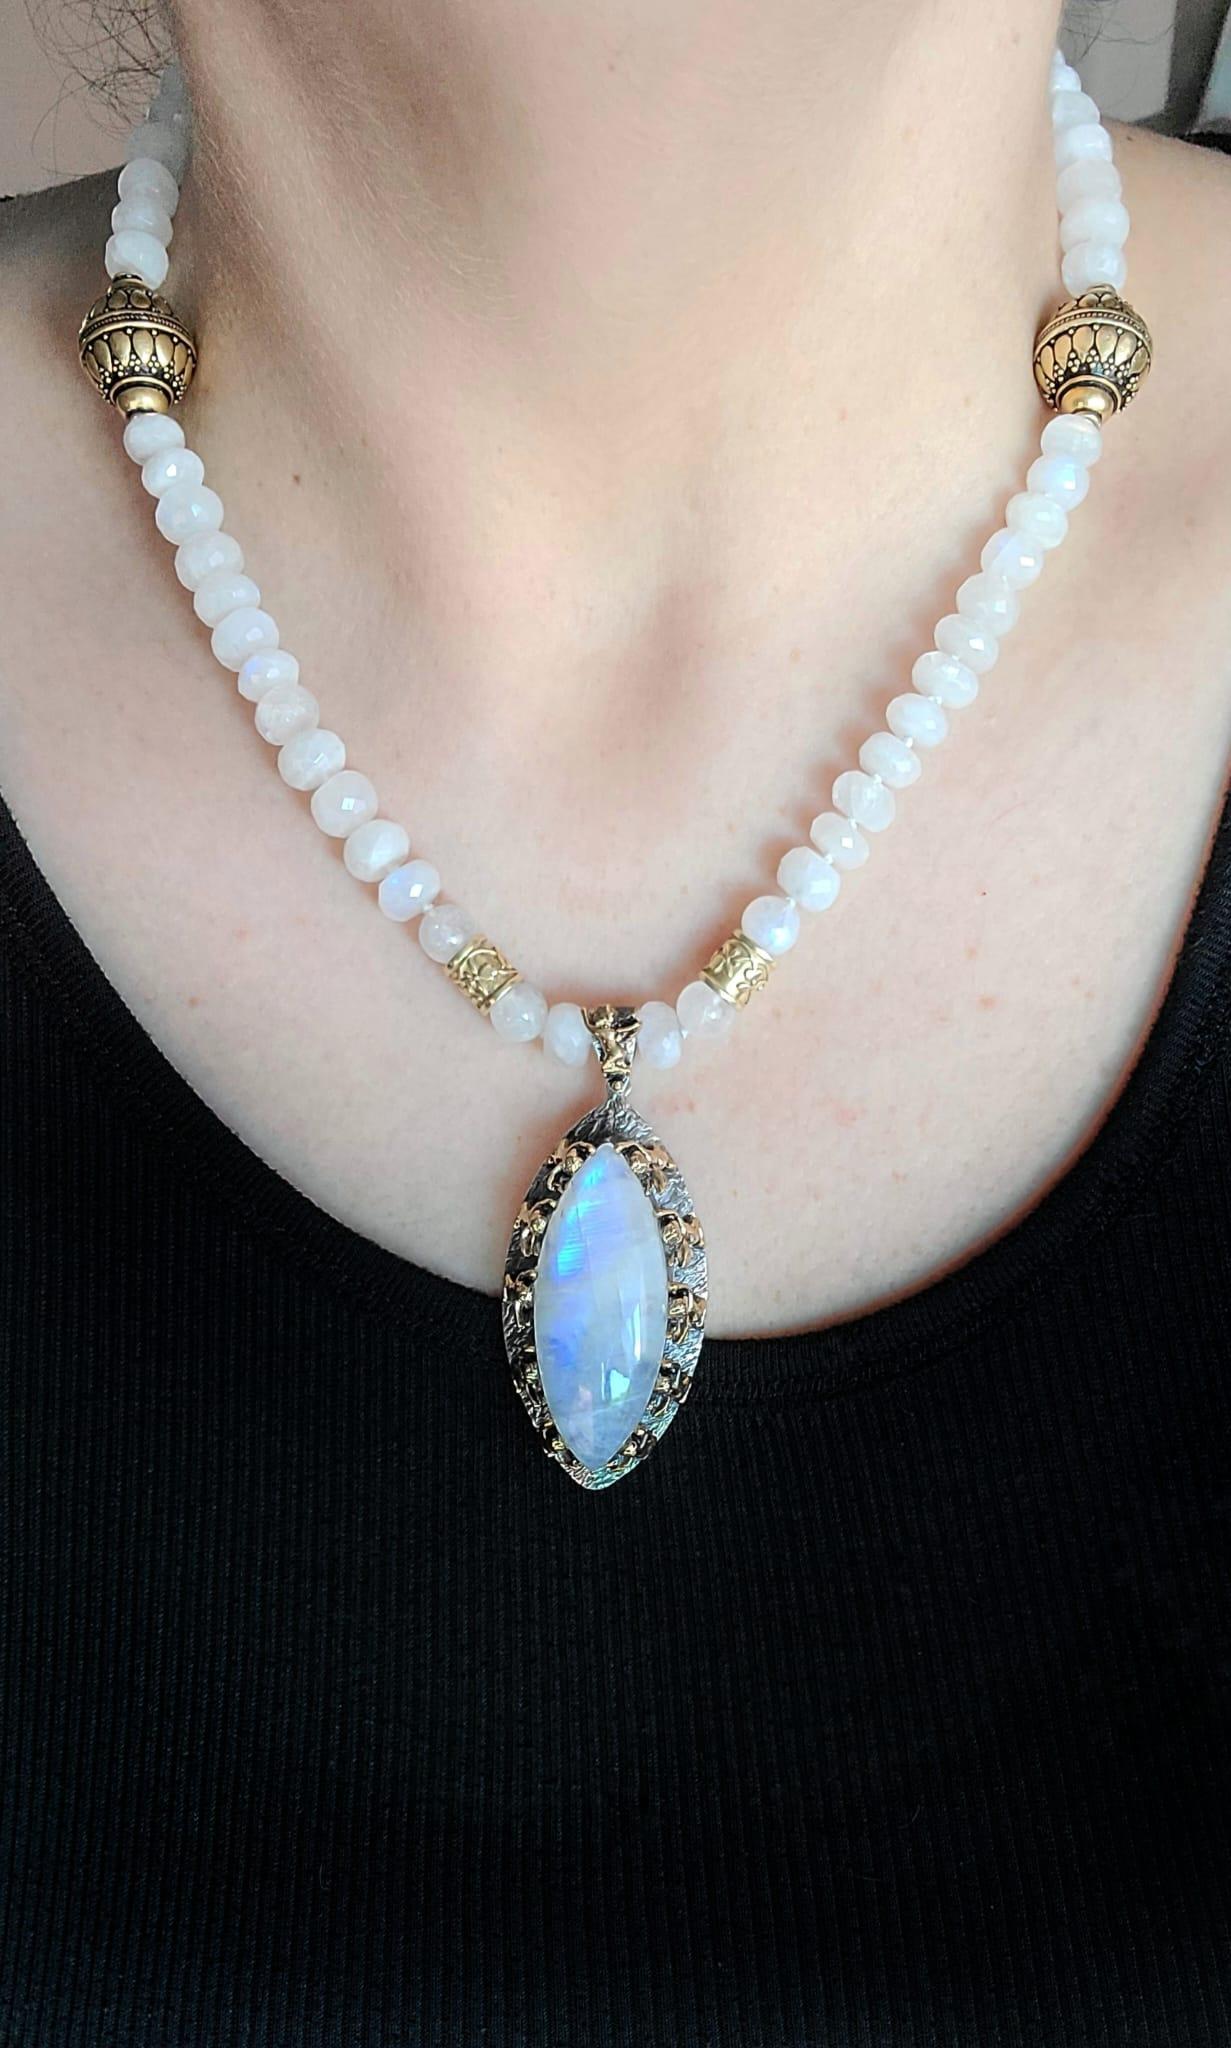 One-of-a-Kind

Rainbow Moonstone is set in a beautiful Bora hand-crafted  sterling and bronze pendant . 
The large polished moonstone is supported by ten cherubs who surround it. The bezel that holds
the necklace is one last cherub. The necklace is